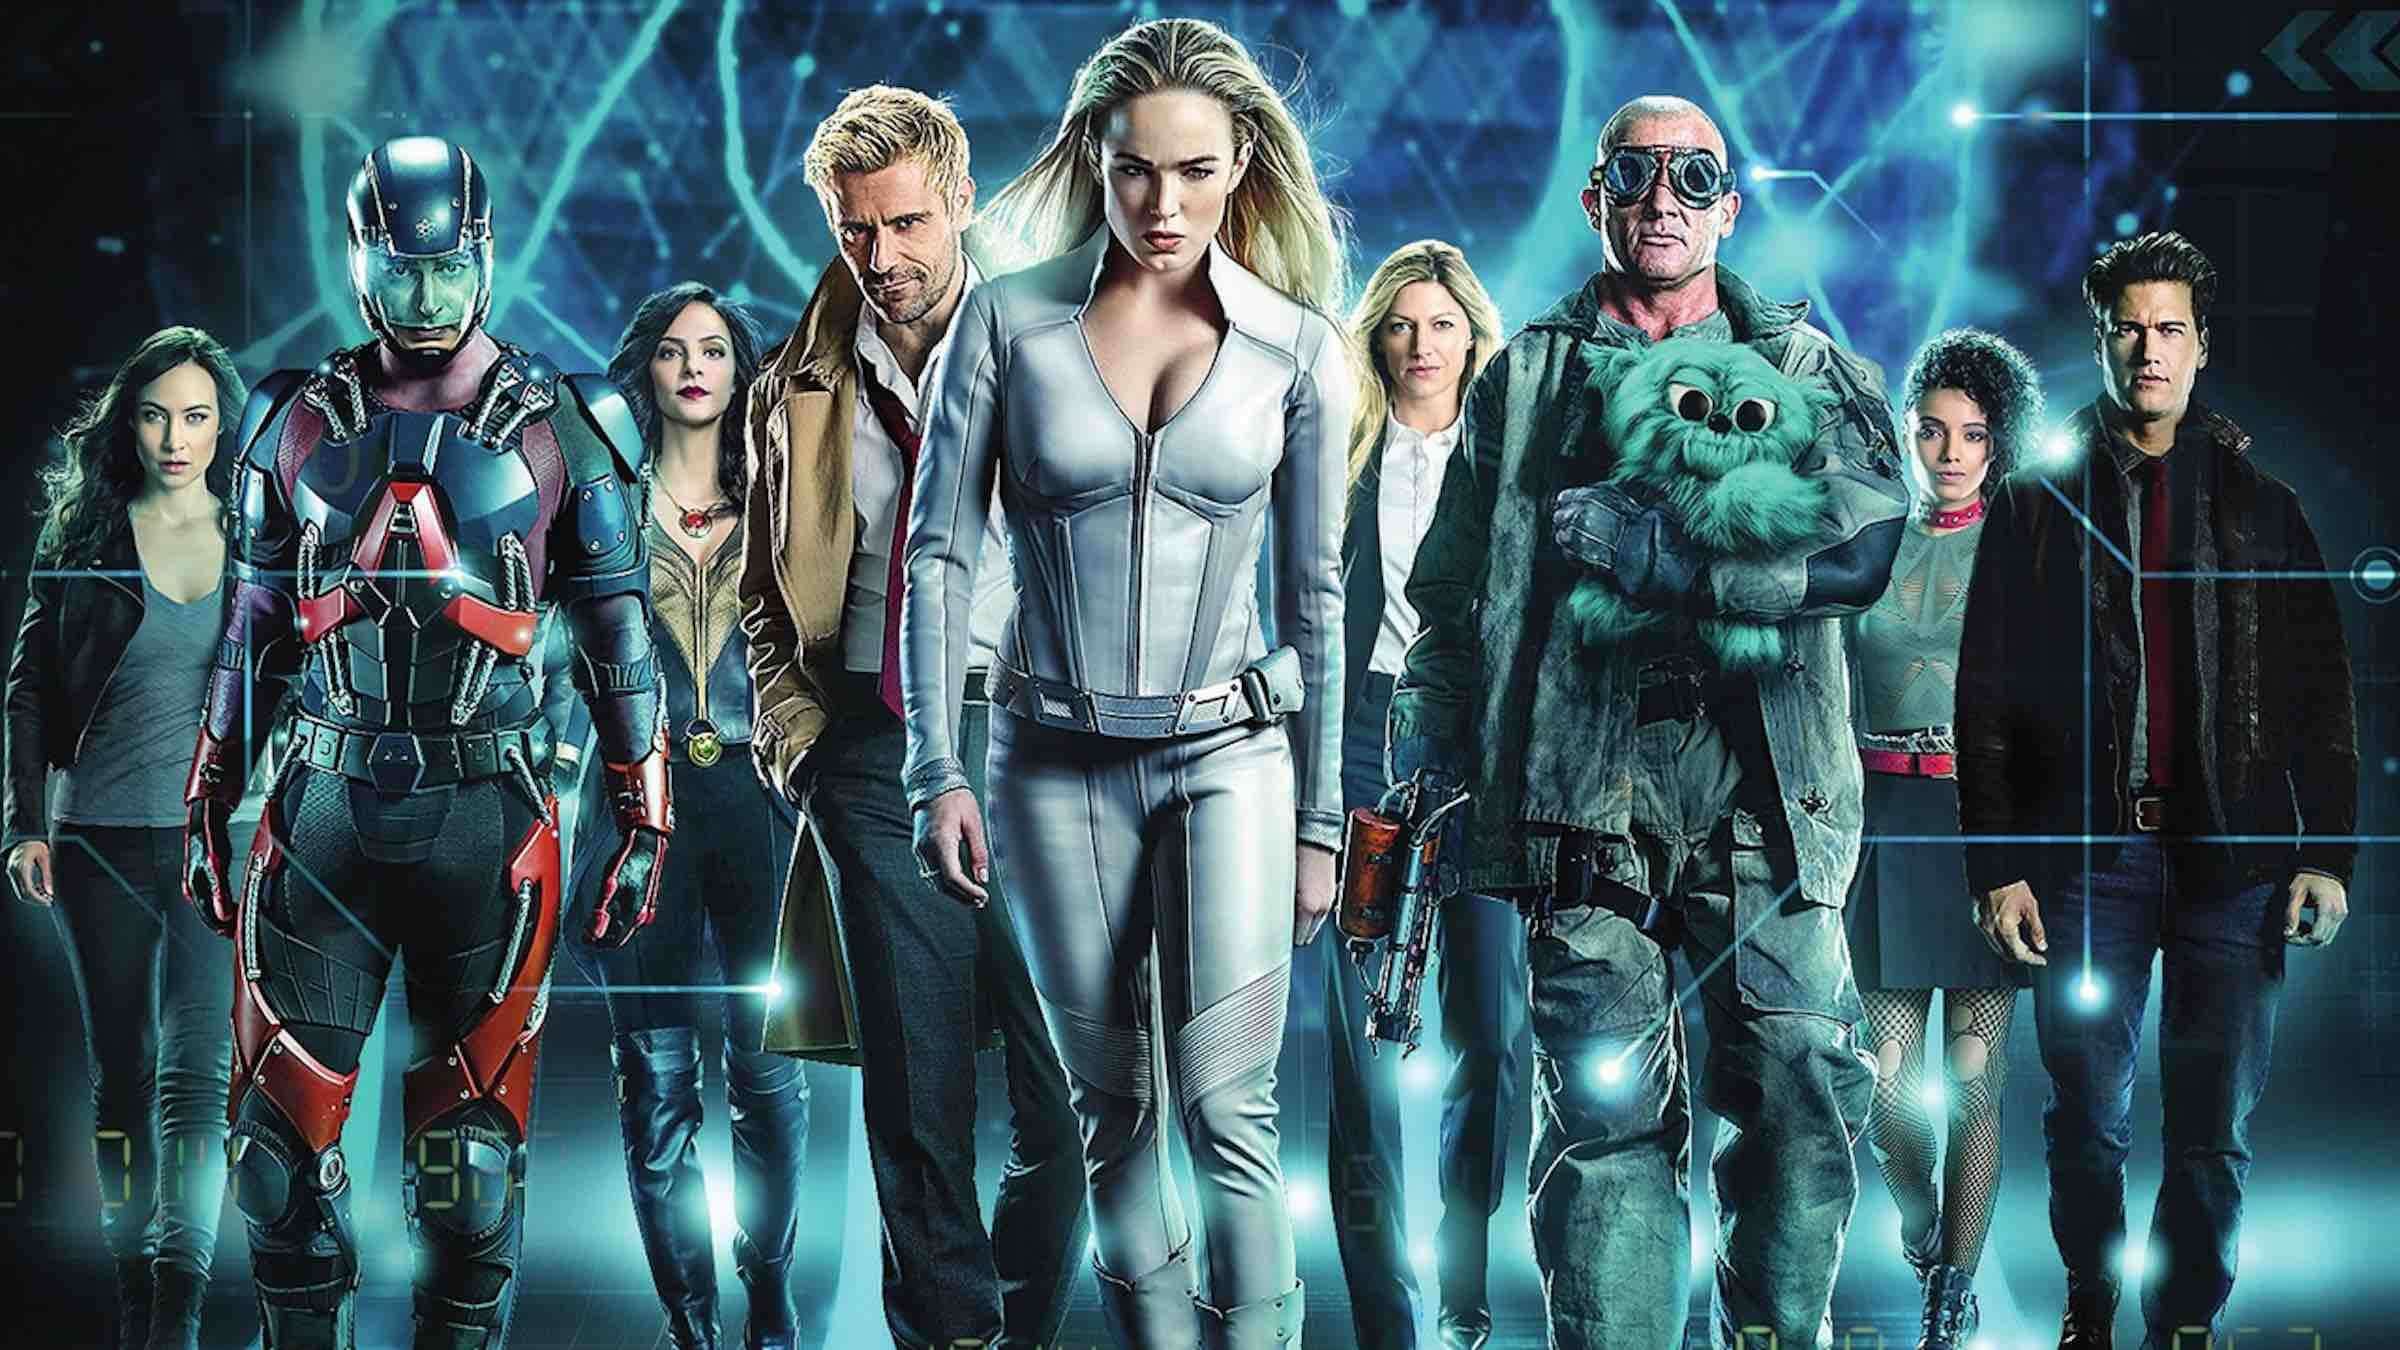 promotional image of Legends of Tomorrow cast